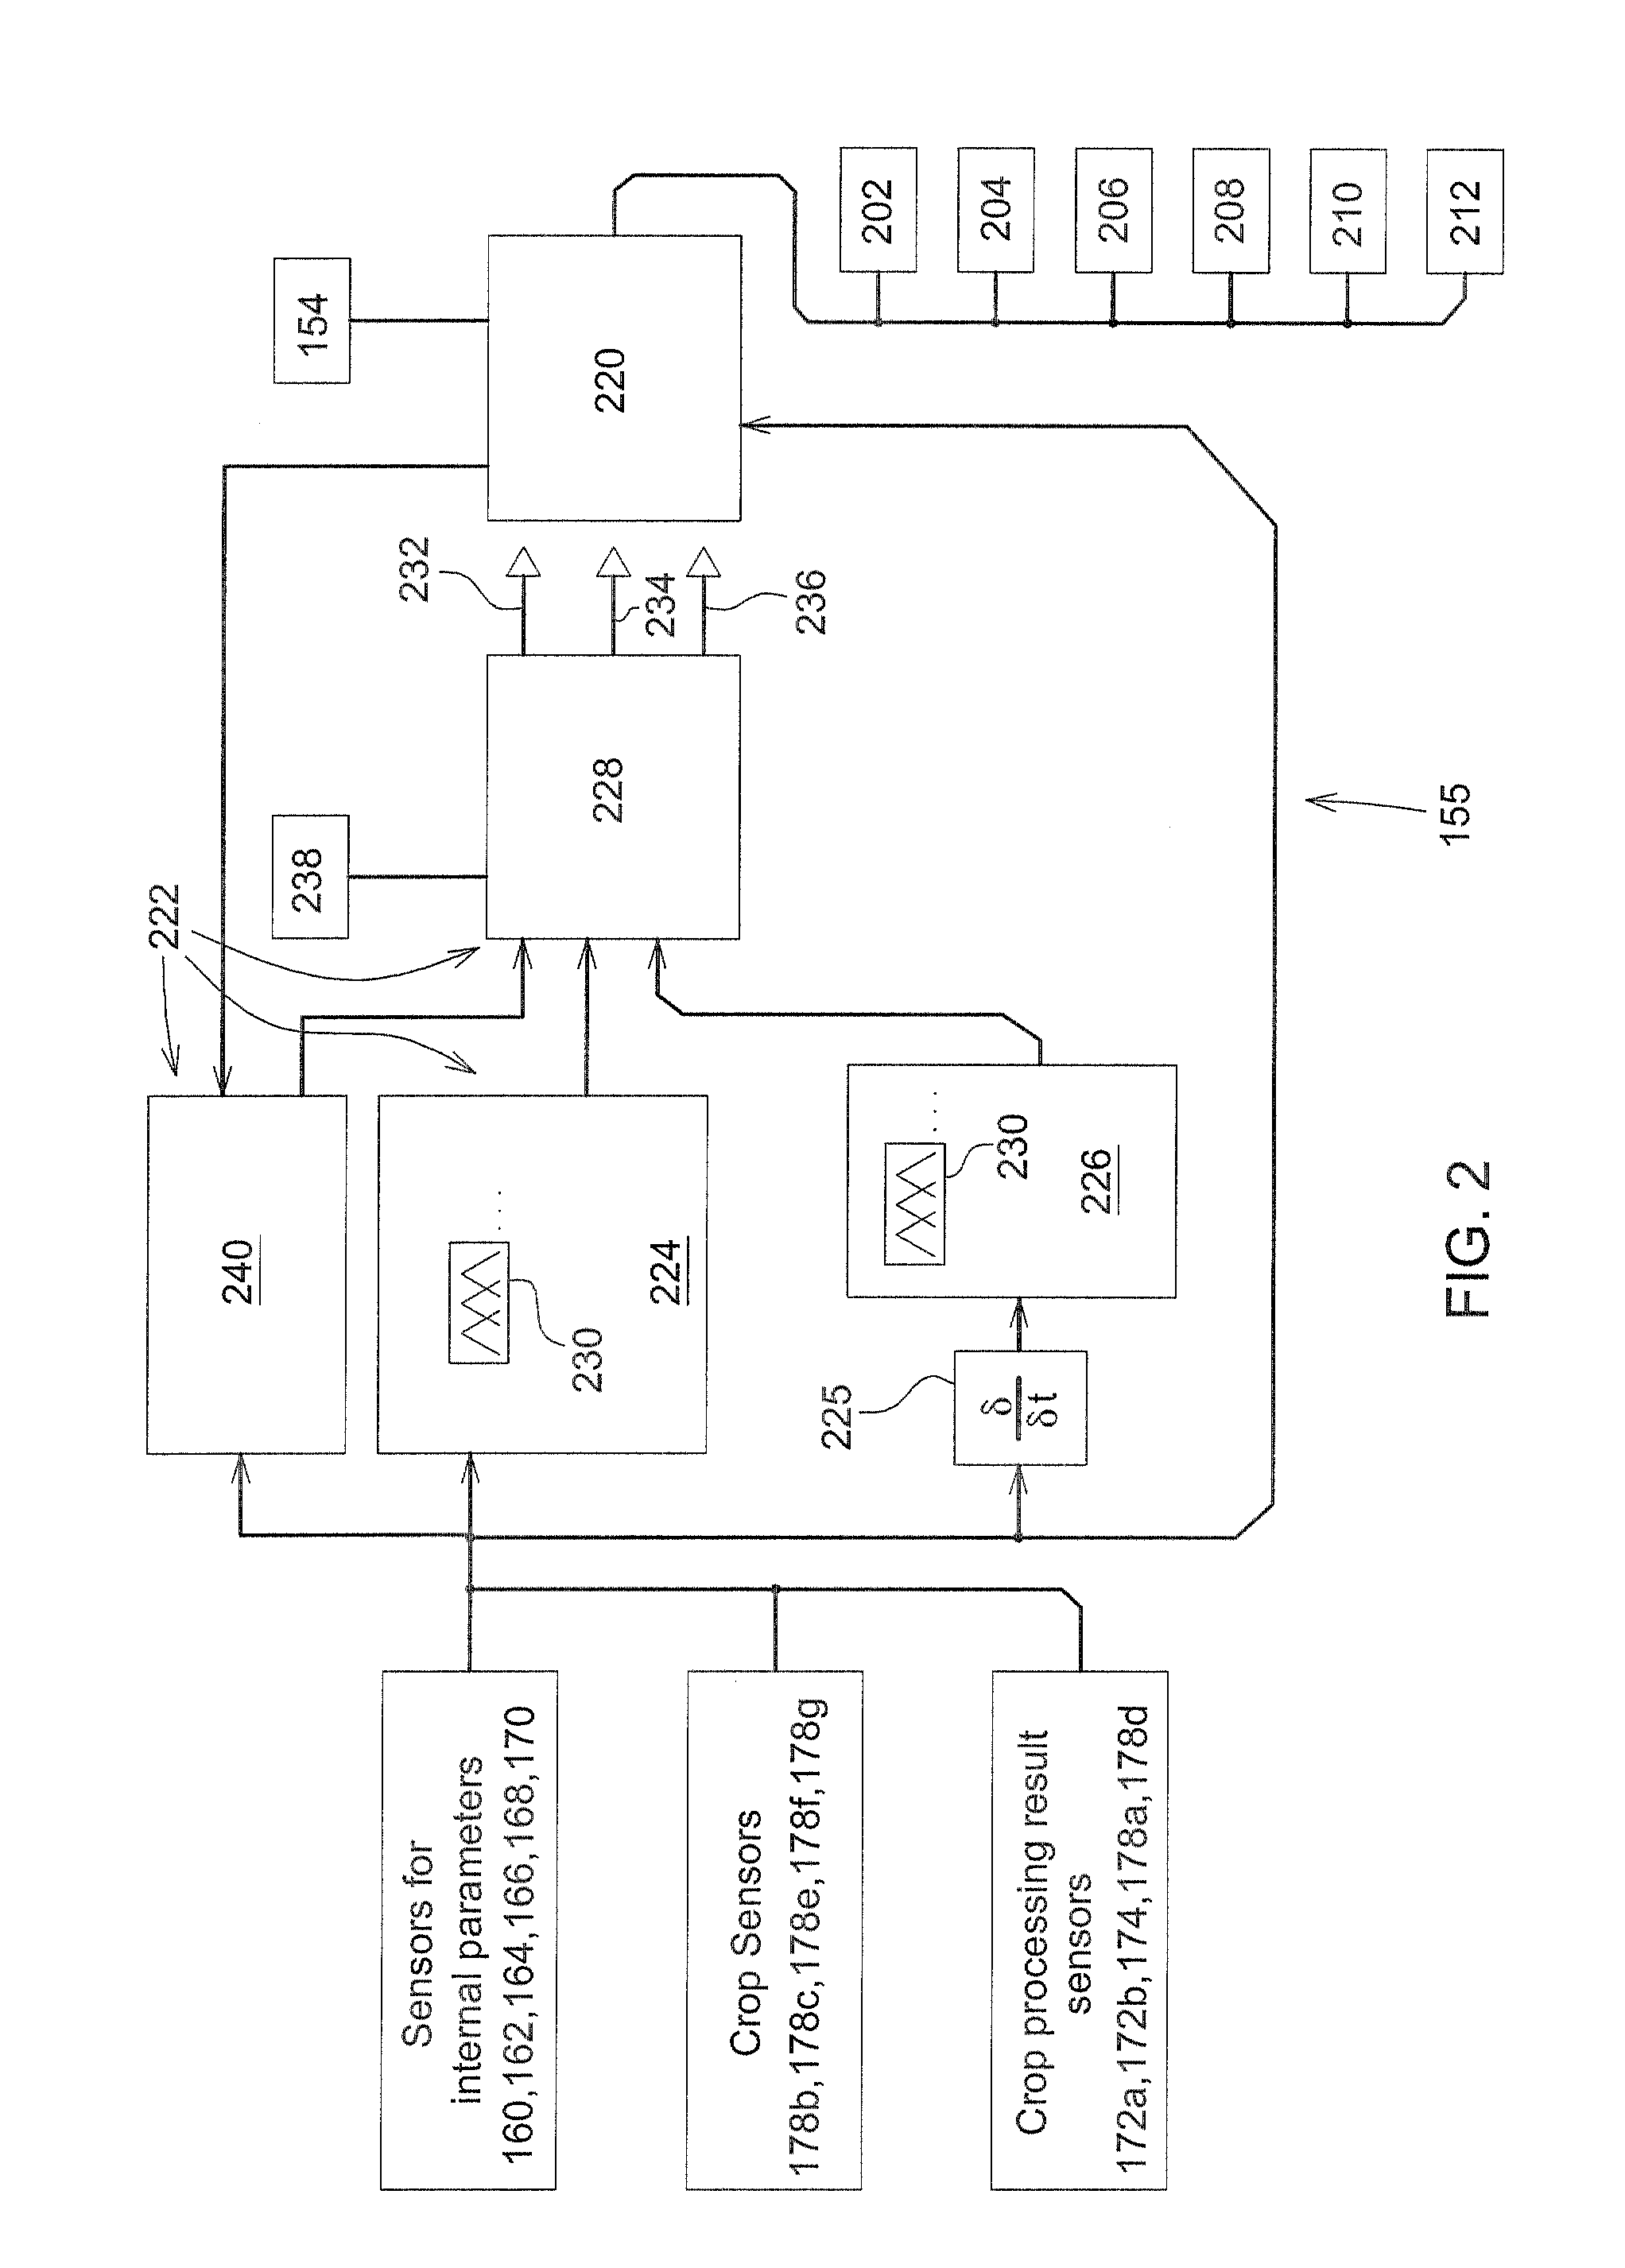 Operating state detection system for work machine with fusion considering sensor value reliabilty